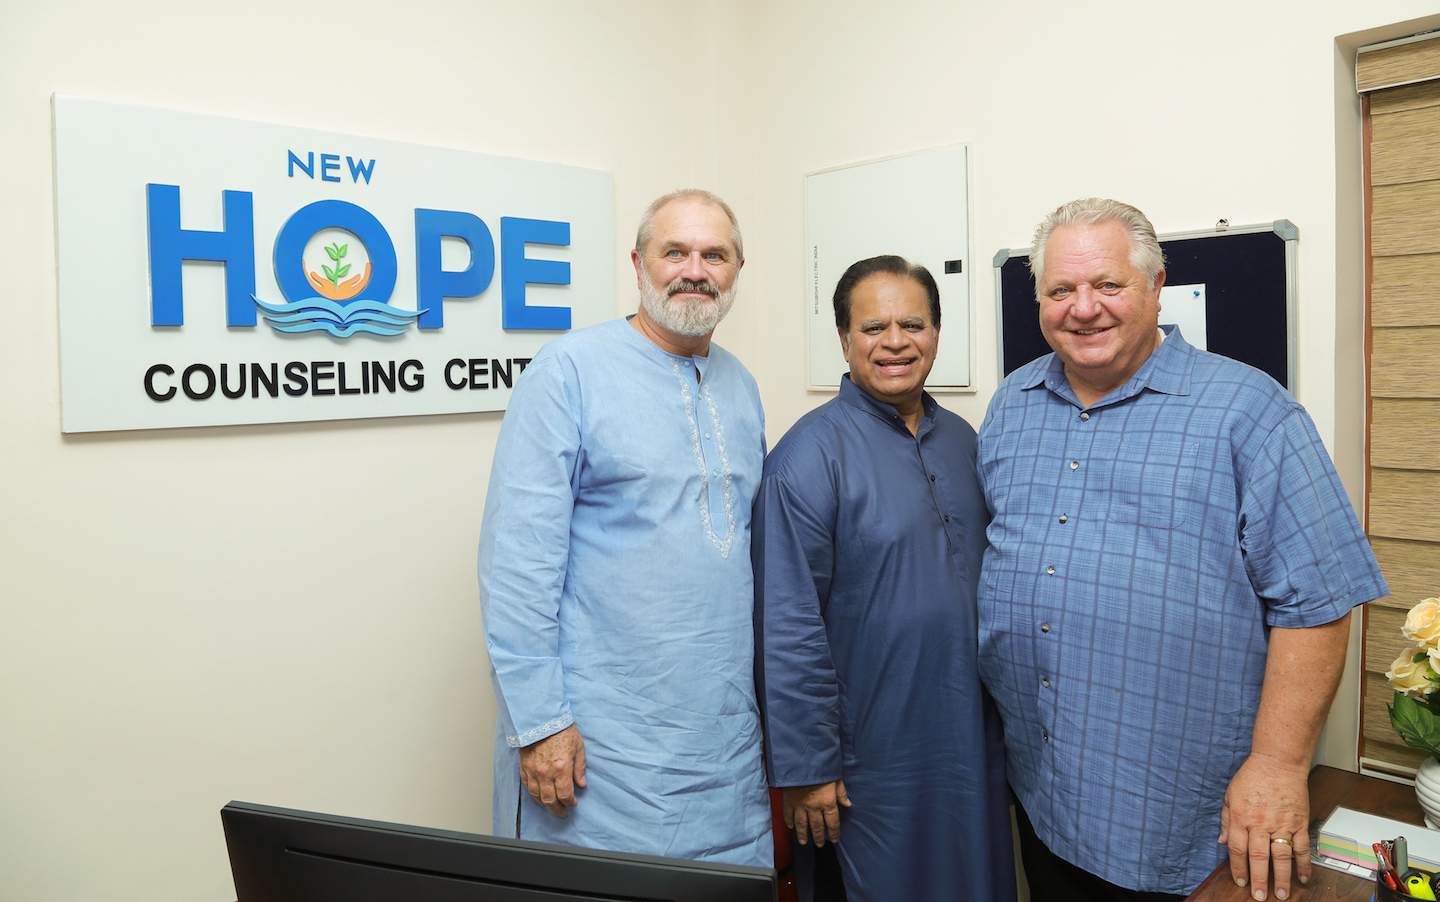 IGO President Valson Abraham (center) leads dedication of the New Hope Counseling Center at India Bible College and Seminary.  Pastors Amos Dodge and Dennis Gallaher, close friends of the school, participated in the dedication.